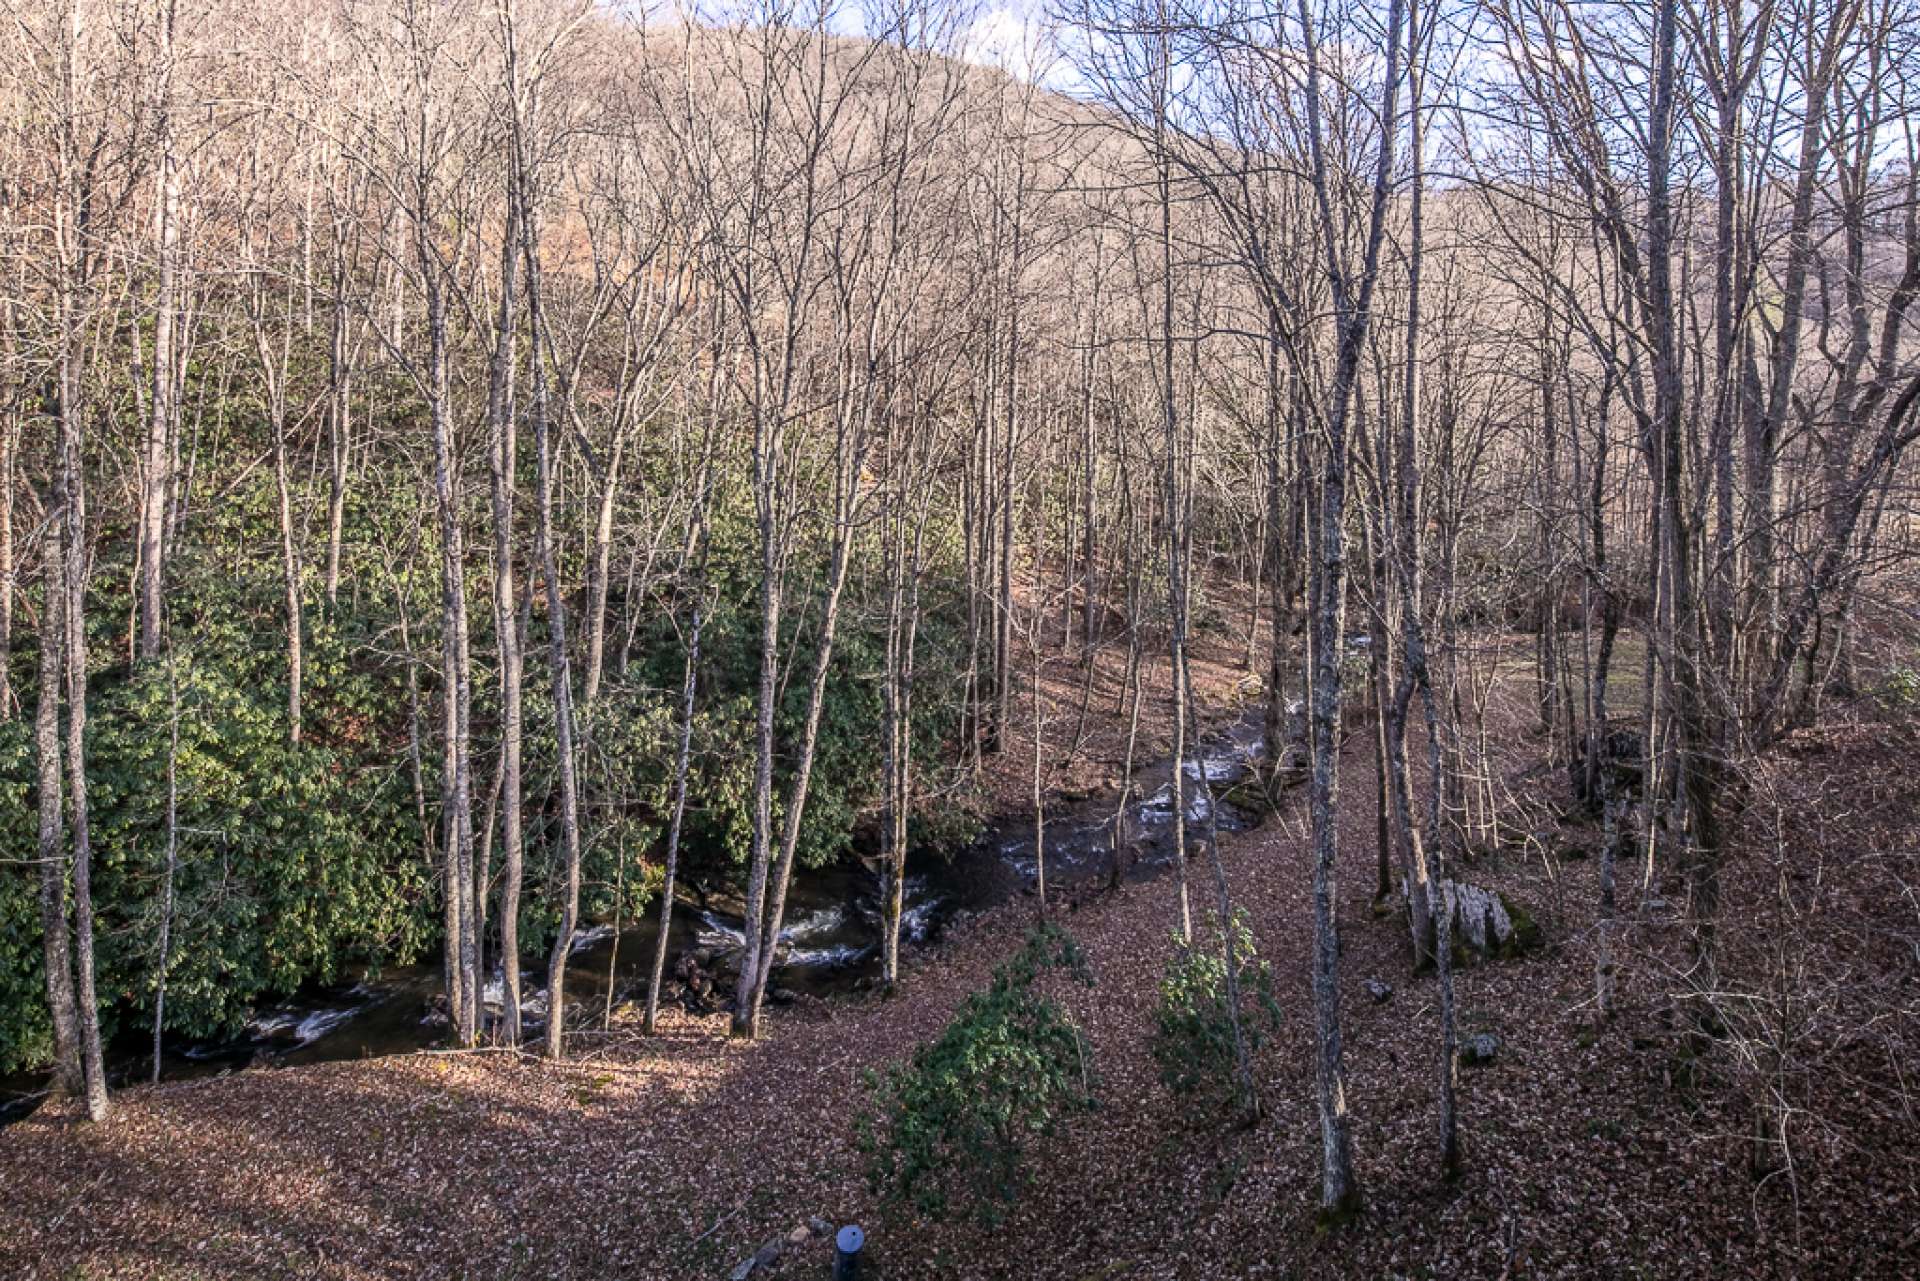 The 2.45 acre setting offers lots of exploration  and hiking opportunities.  The creek along with a diverse mixture of hardwoods, evergreens and native mountain foliage provides a great habitat for abundant wildlife.